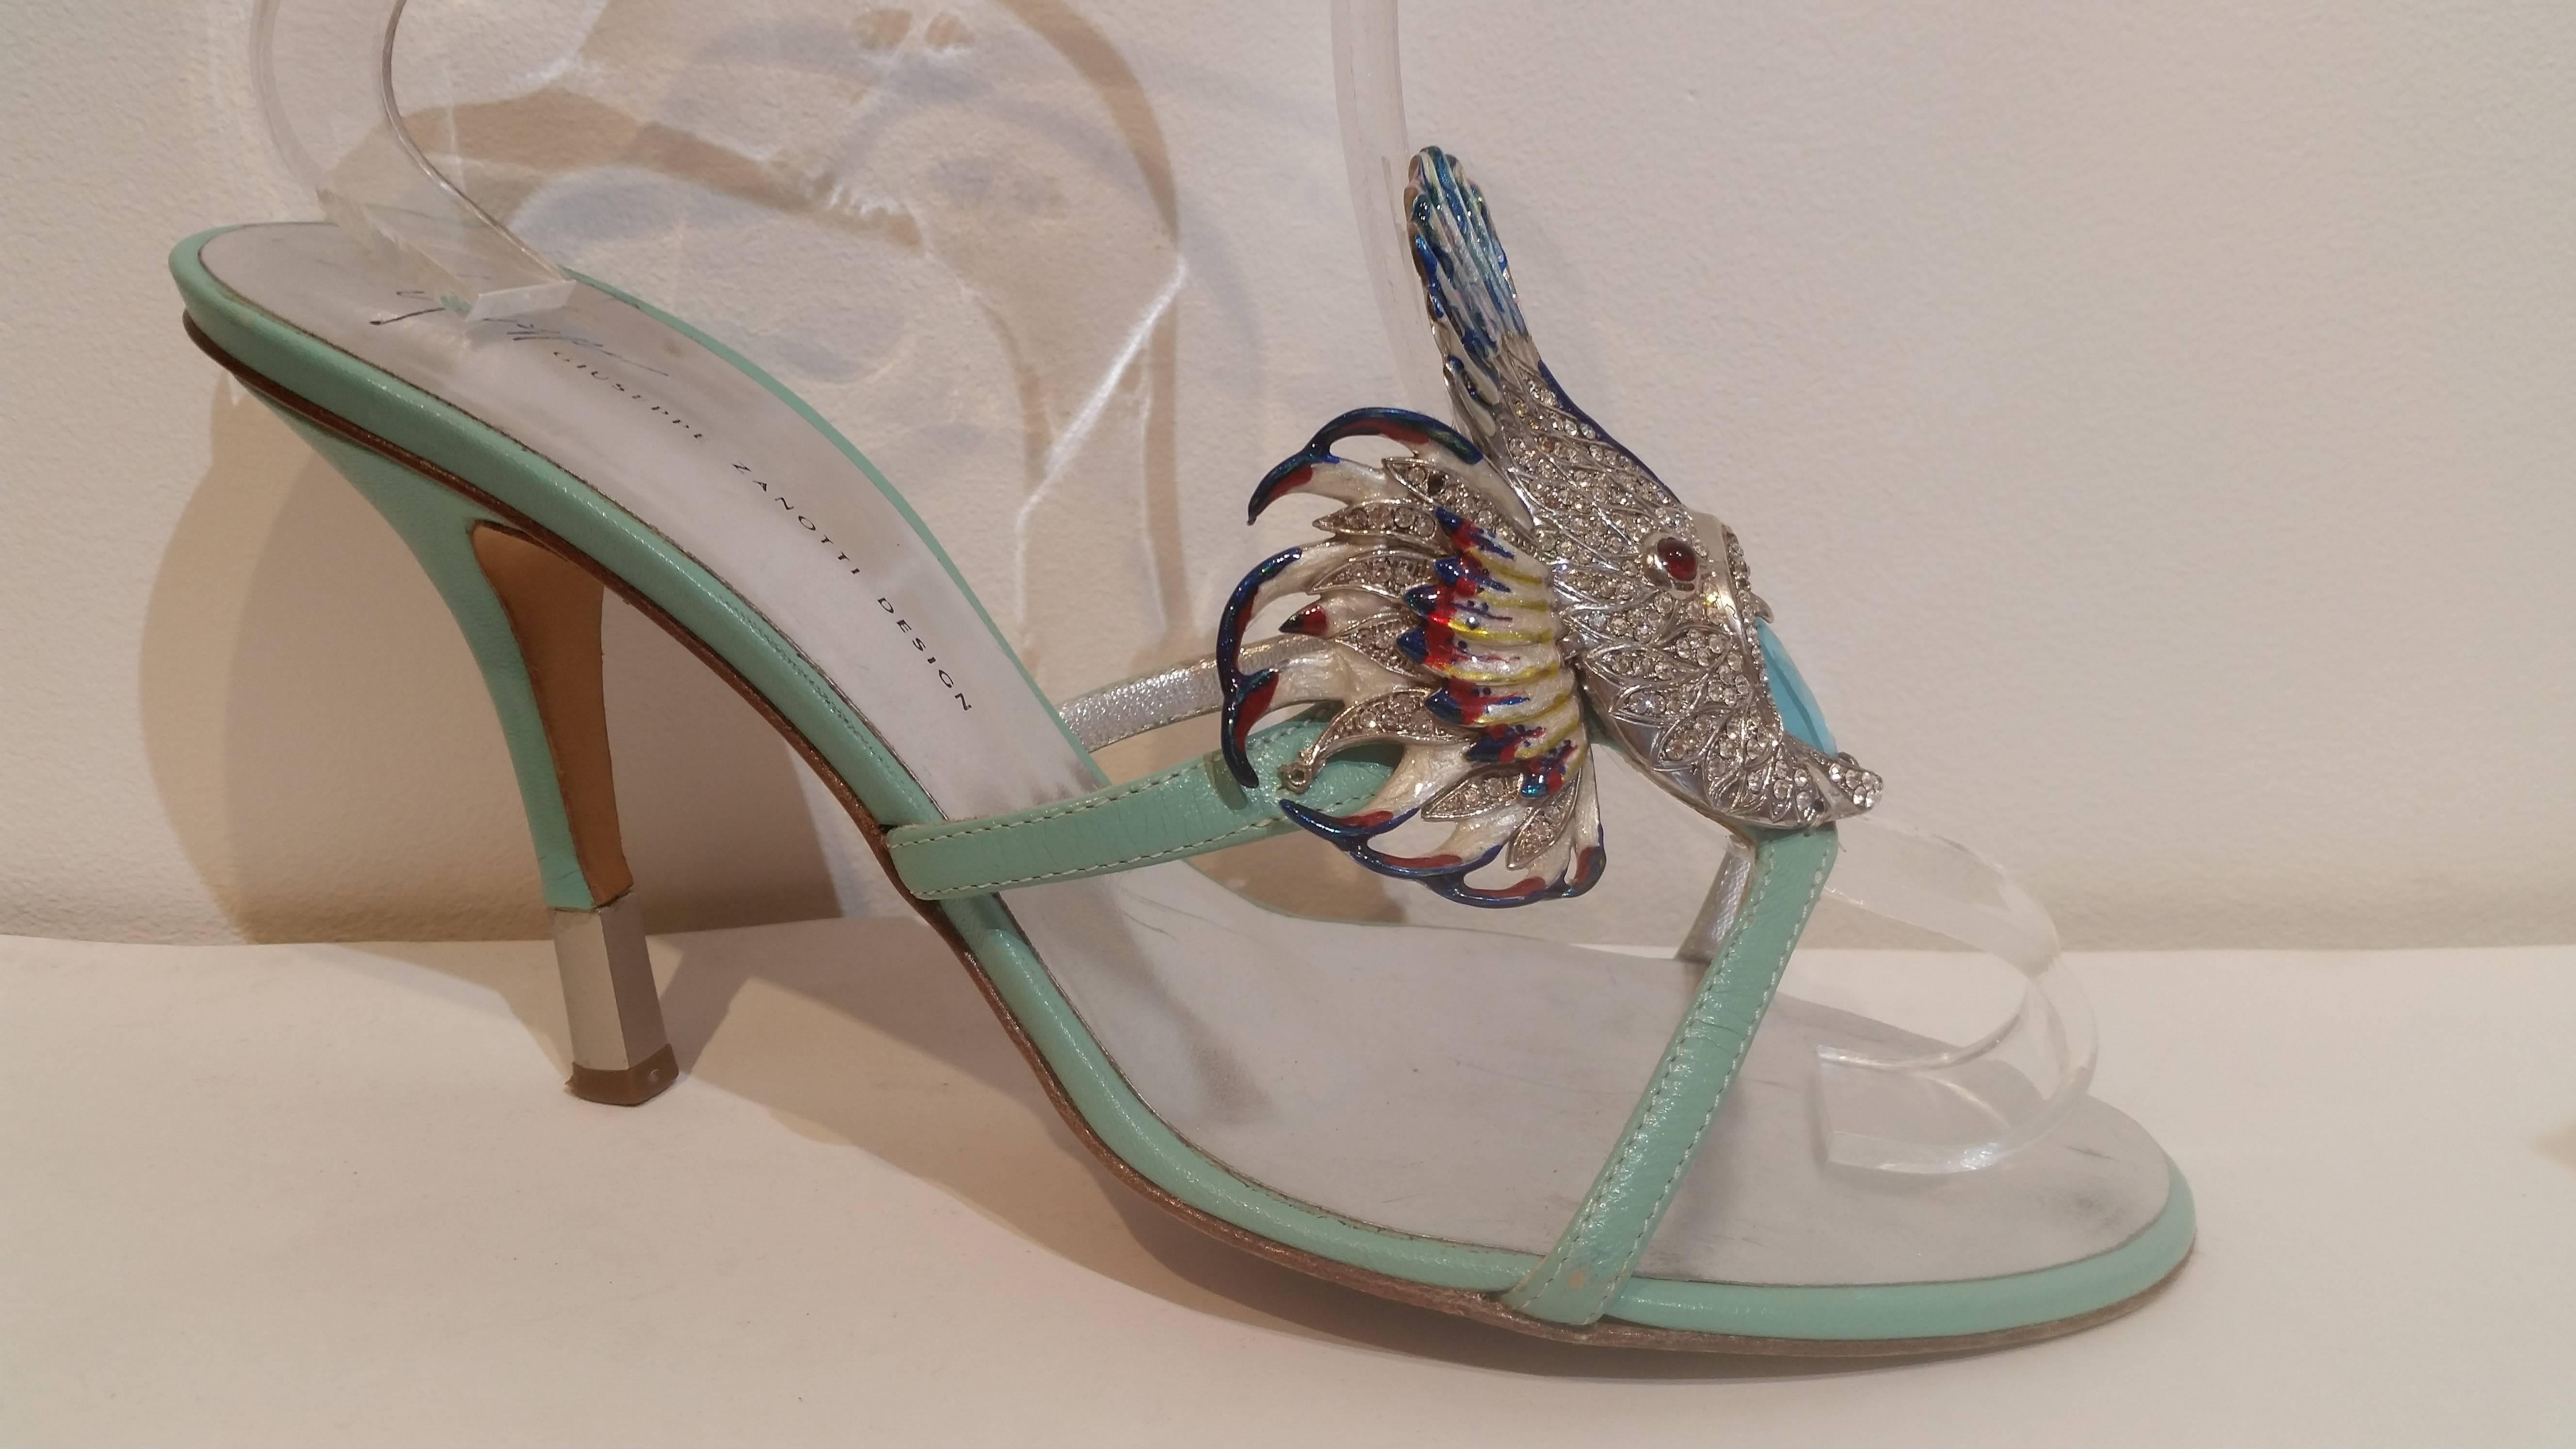 Giuseppe Zanotti Fish Embellished Aqua Mules  In Fair Condition For Sale In Cirencester, Gloucestershire